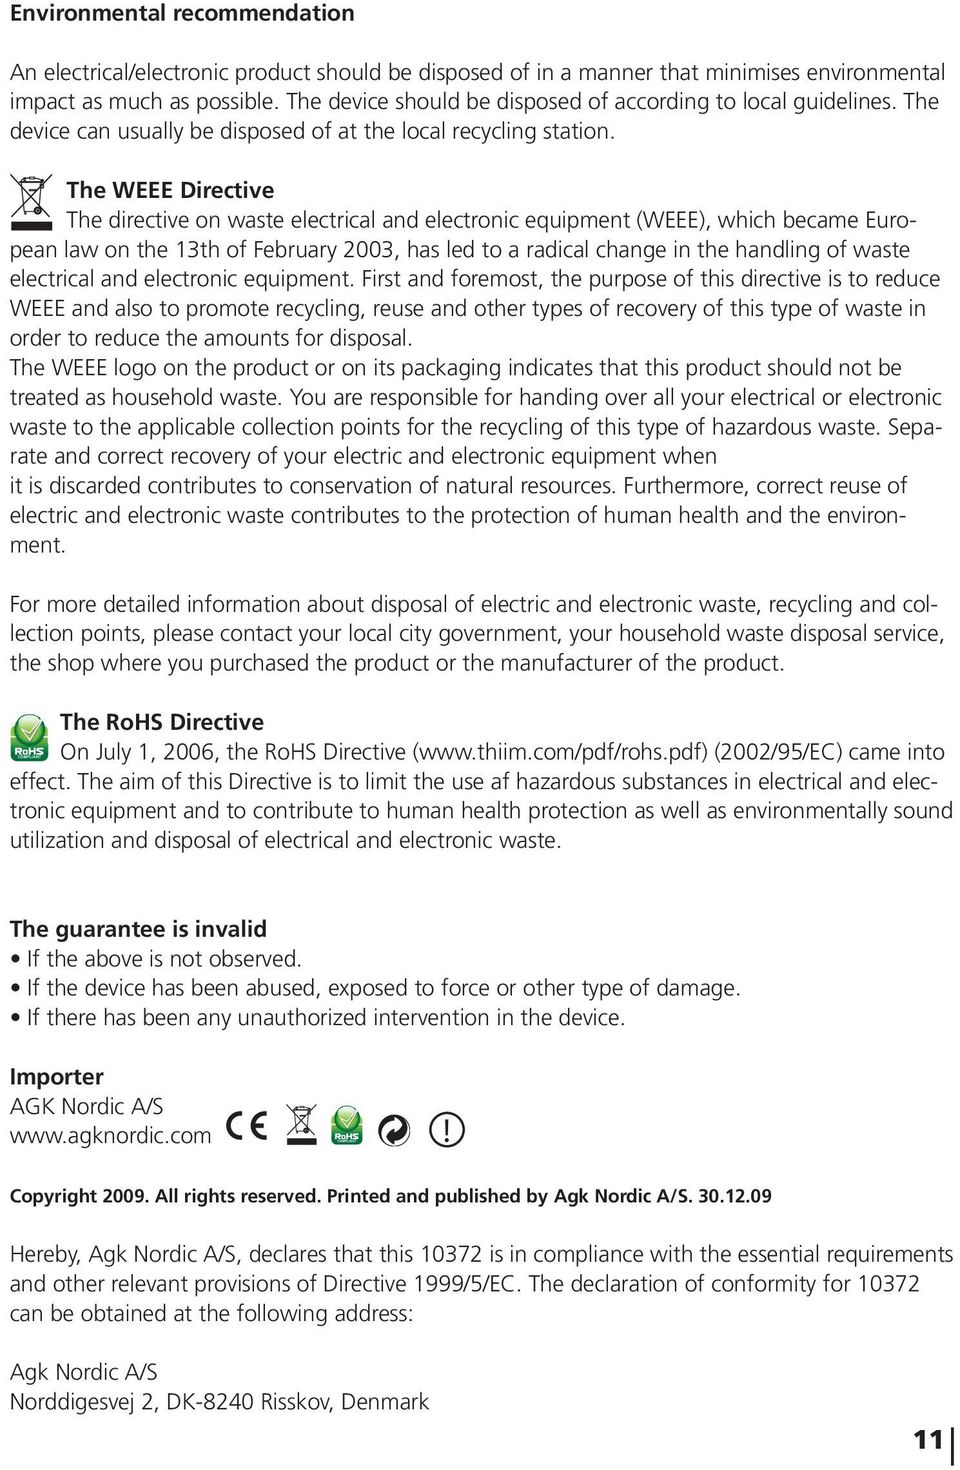 The WEEE Directive The directive on waste electrical and electronic equipment (WEEE), which became European law on the 13th of February 2003, has led to a radical change in the handling of waste